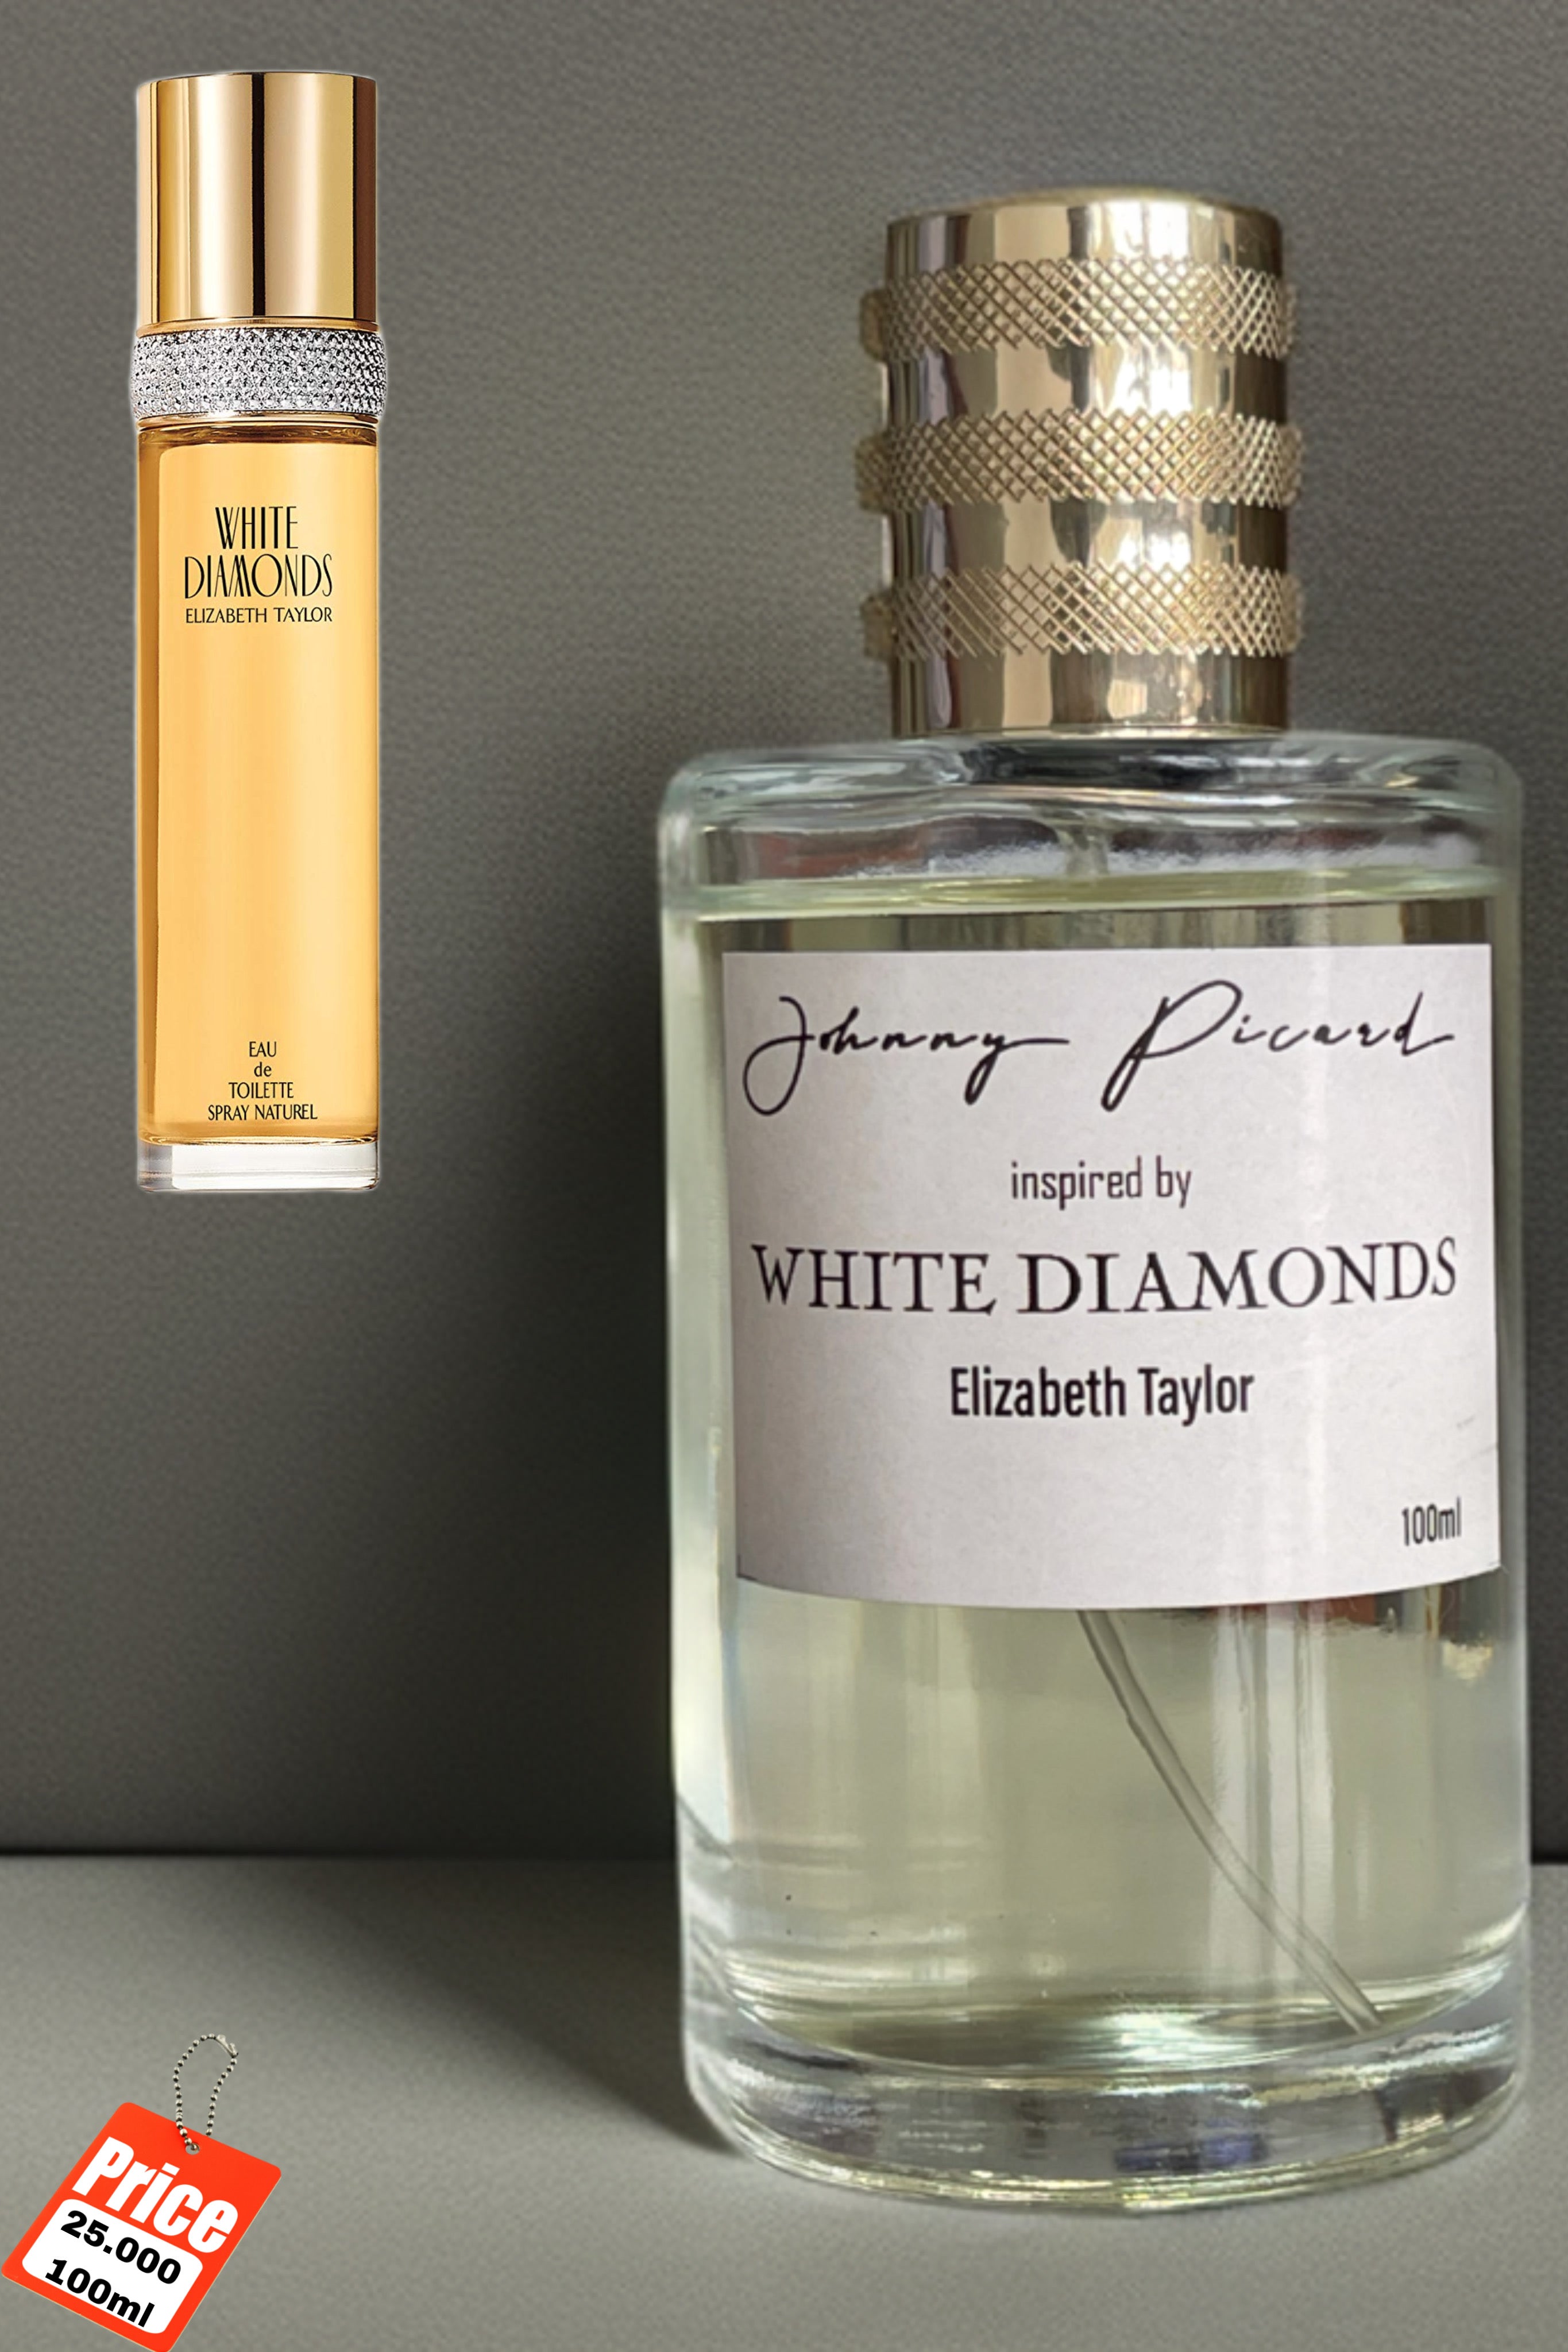 Johnny picard inspired by white diamond ELISABETH TAYLOR